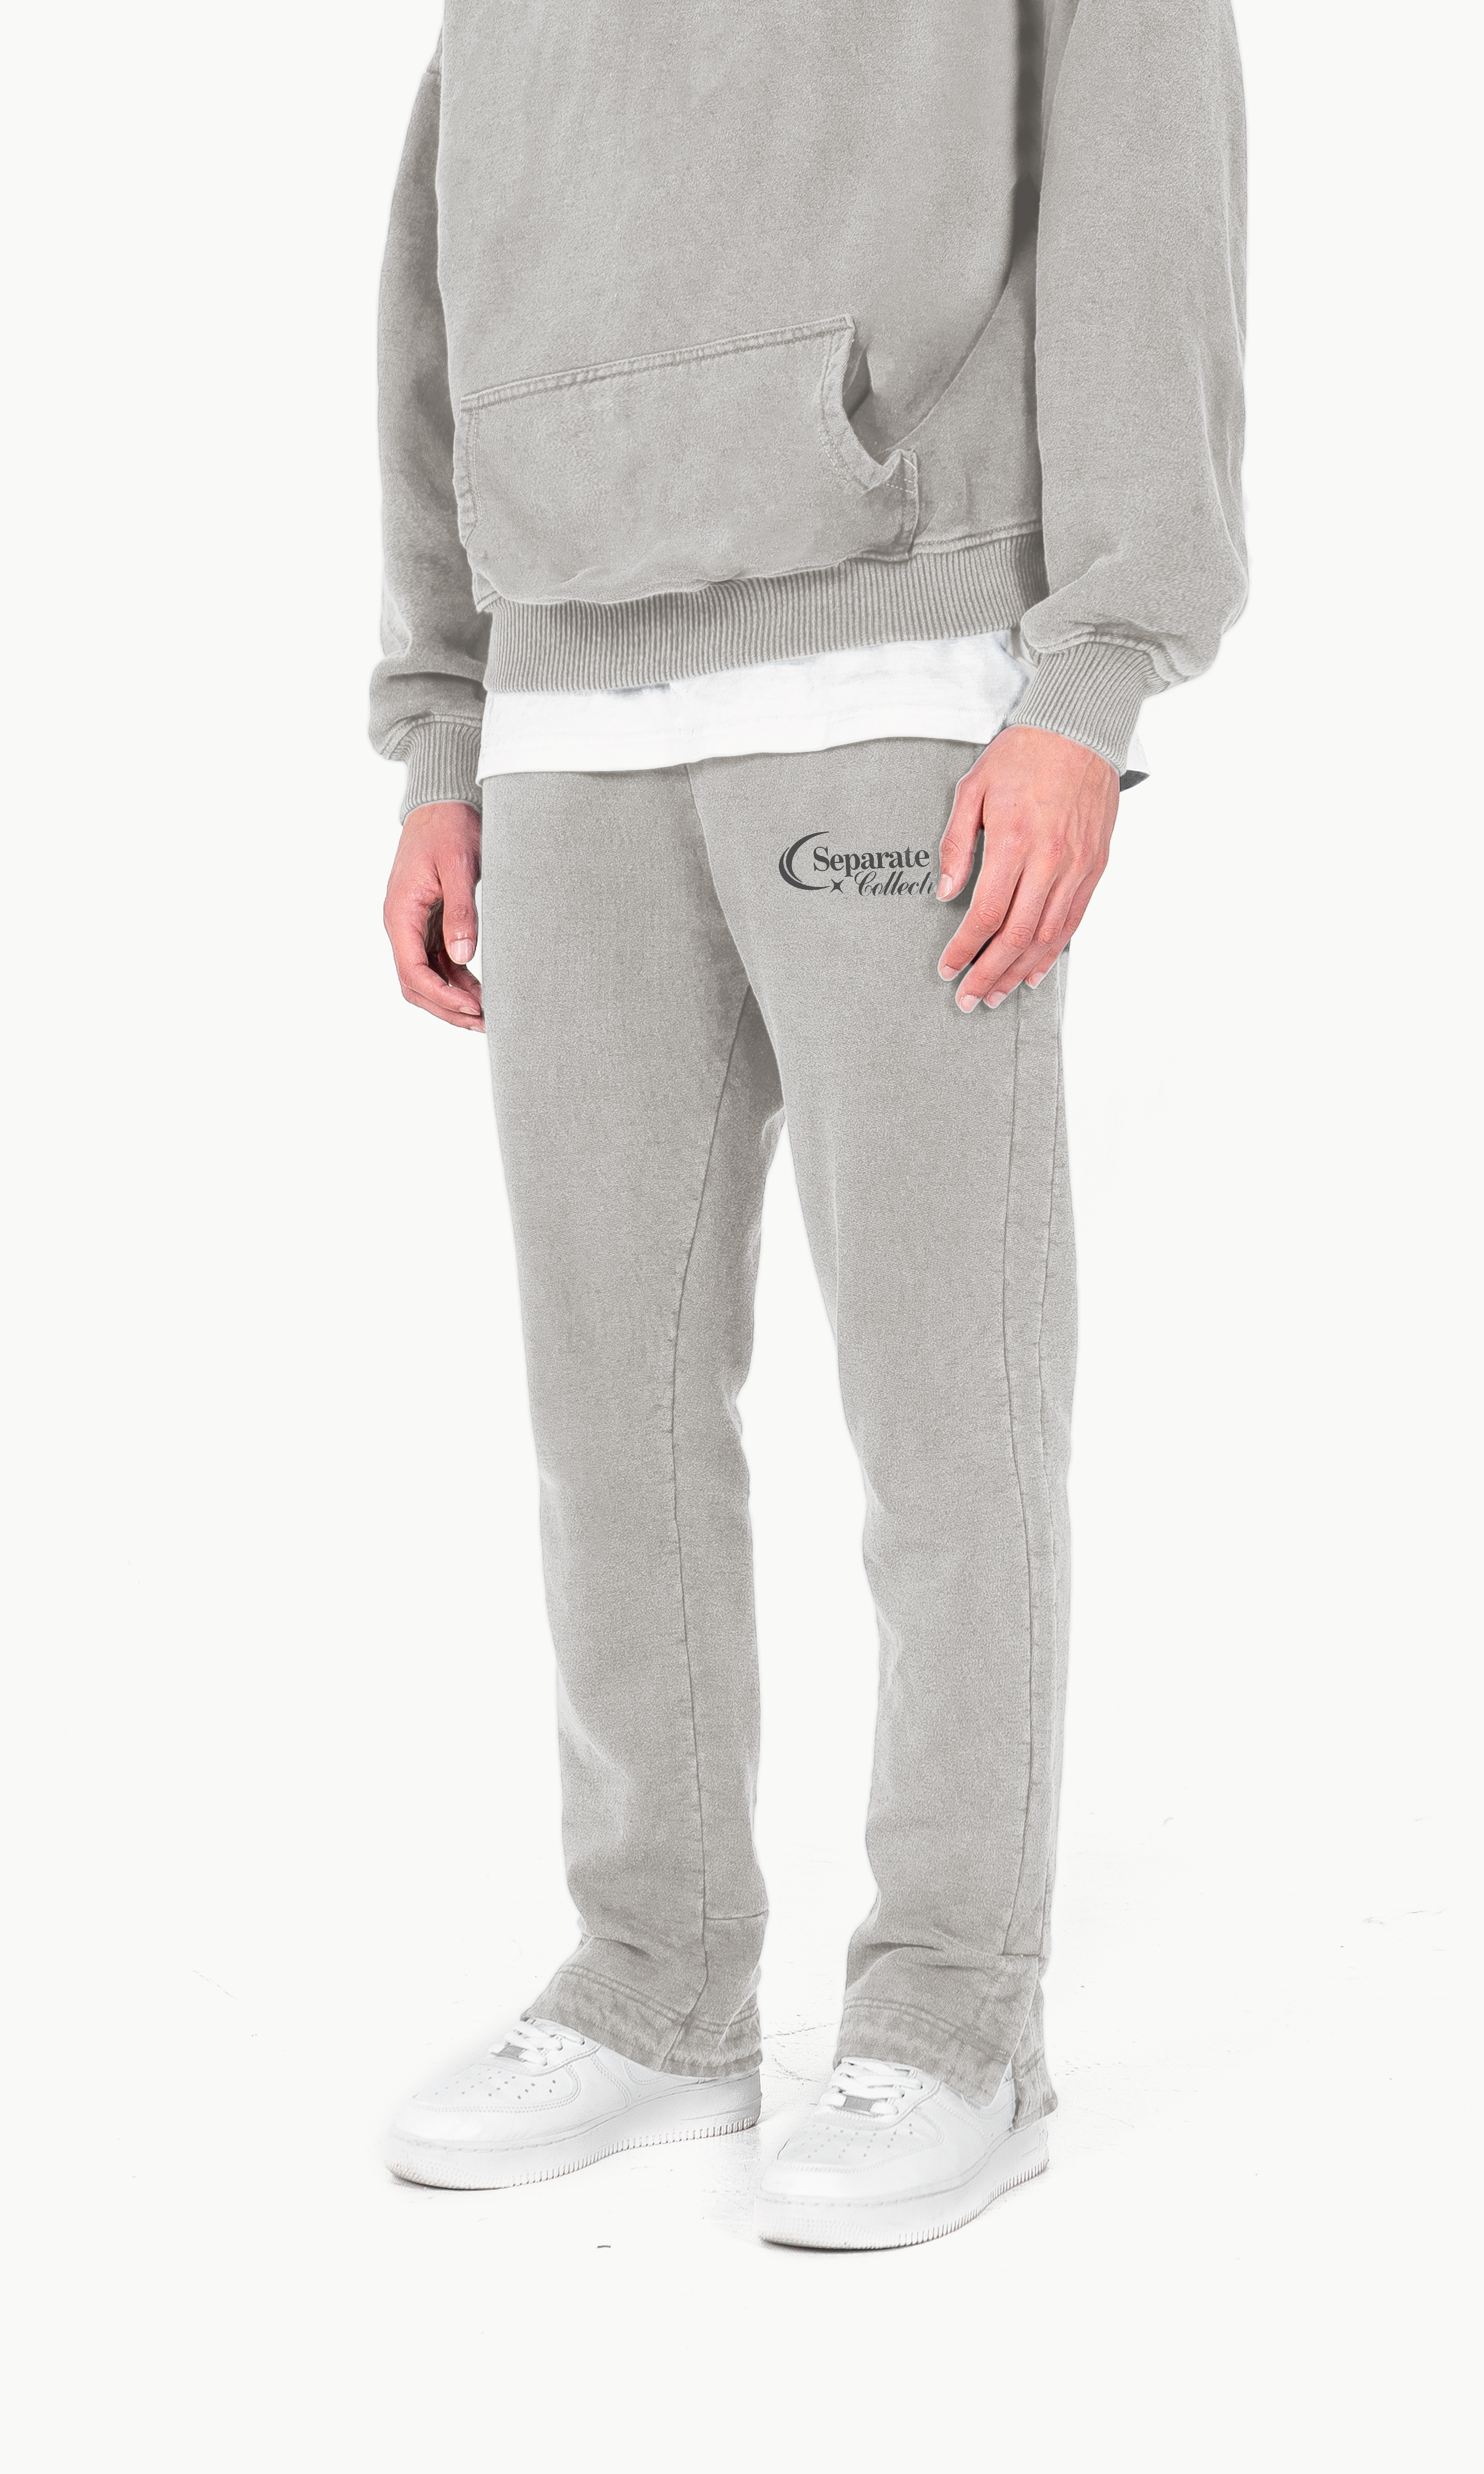 Separate Collection© Wash Split Pant Grey